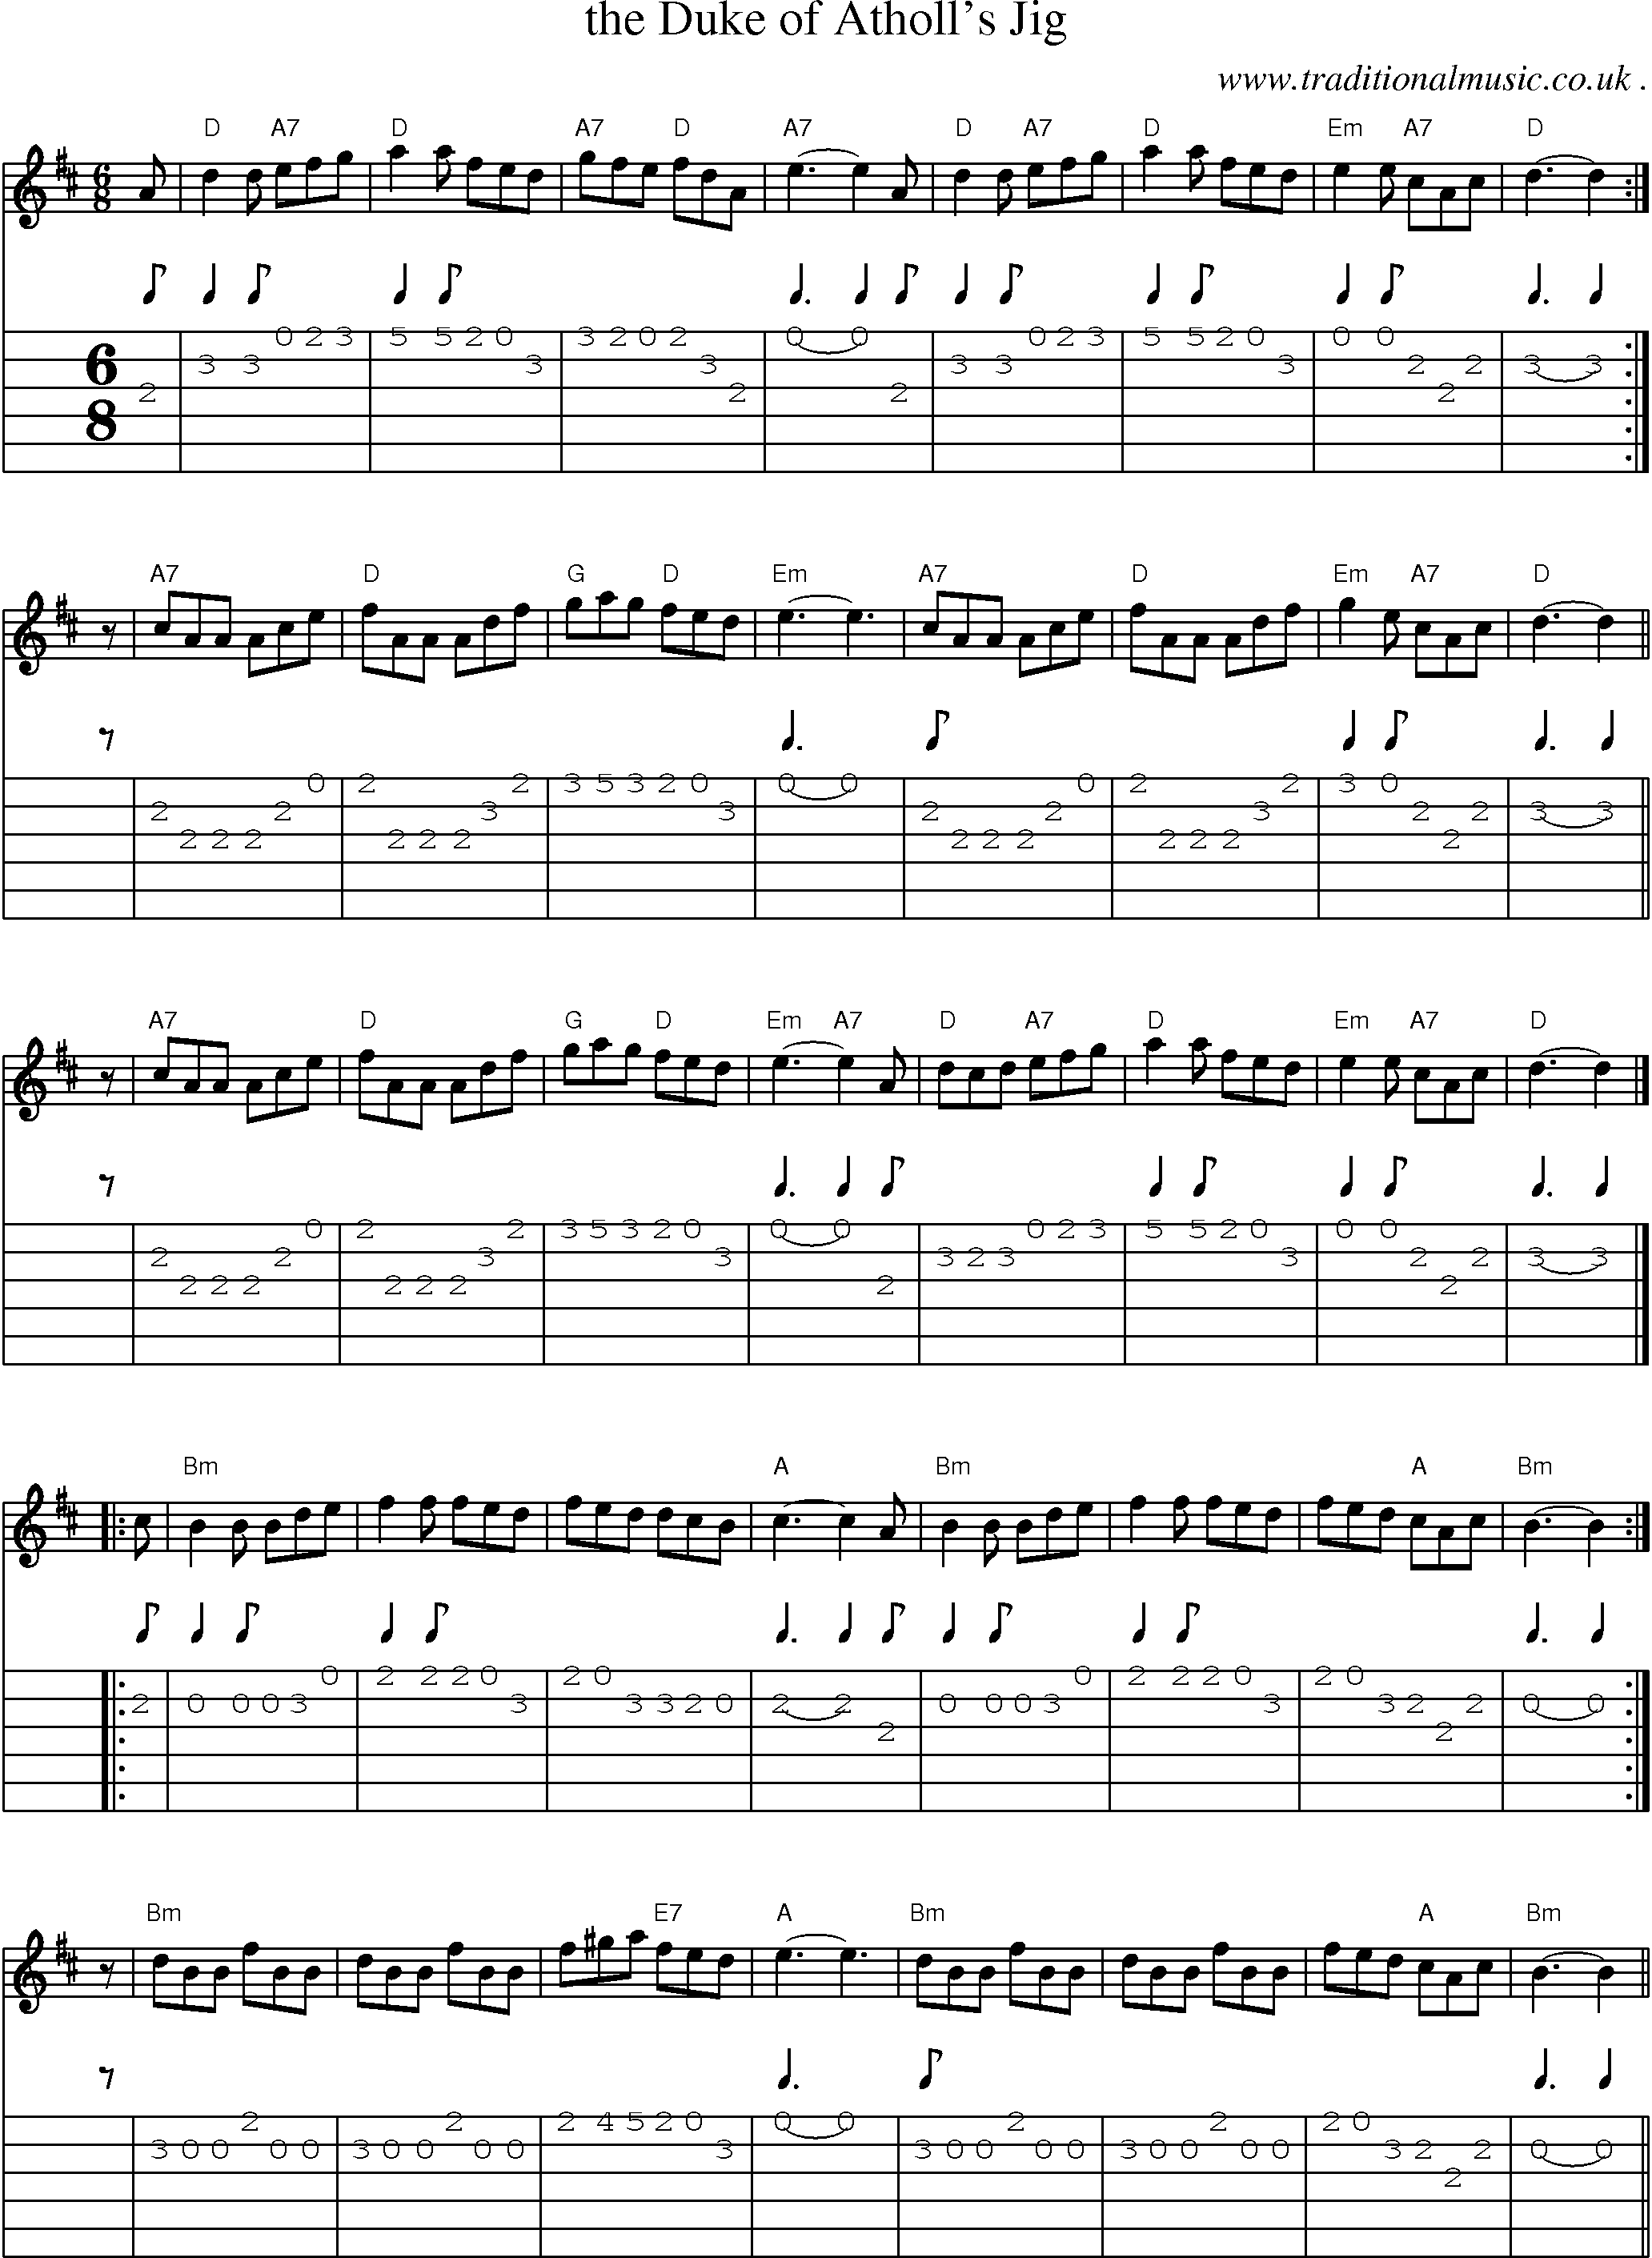 Sheet-music  score, Chords and Guitar Tabs for The Duke Of Atholls Jig